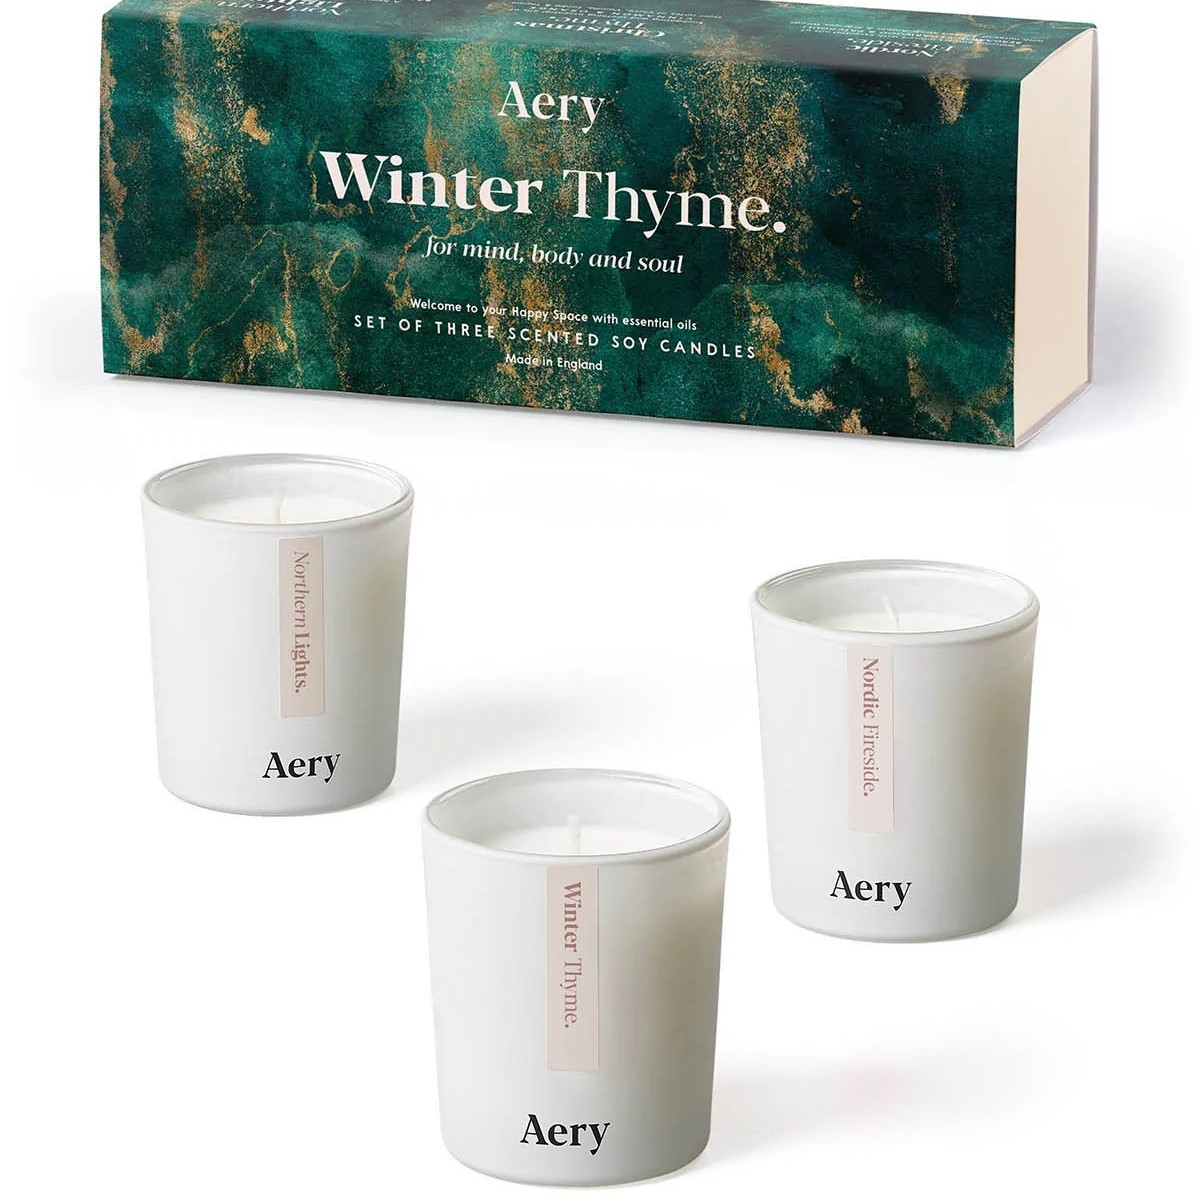 Aery Winter Thyme Set of 3 Votive Candles